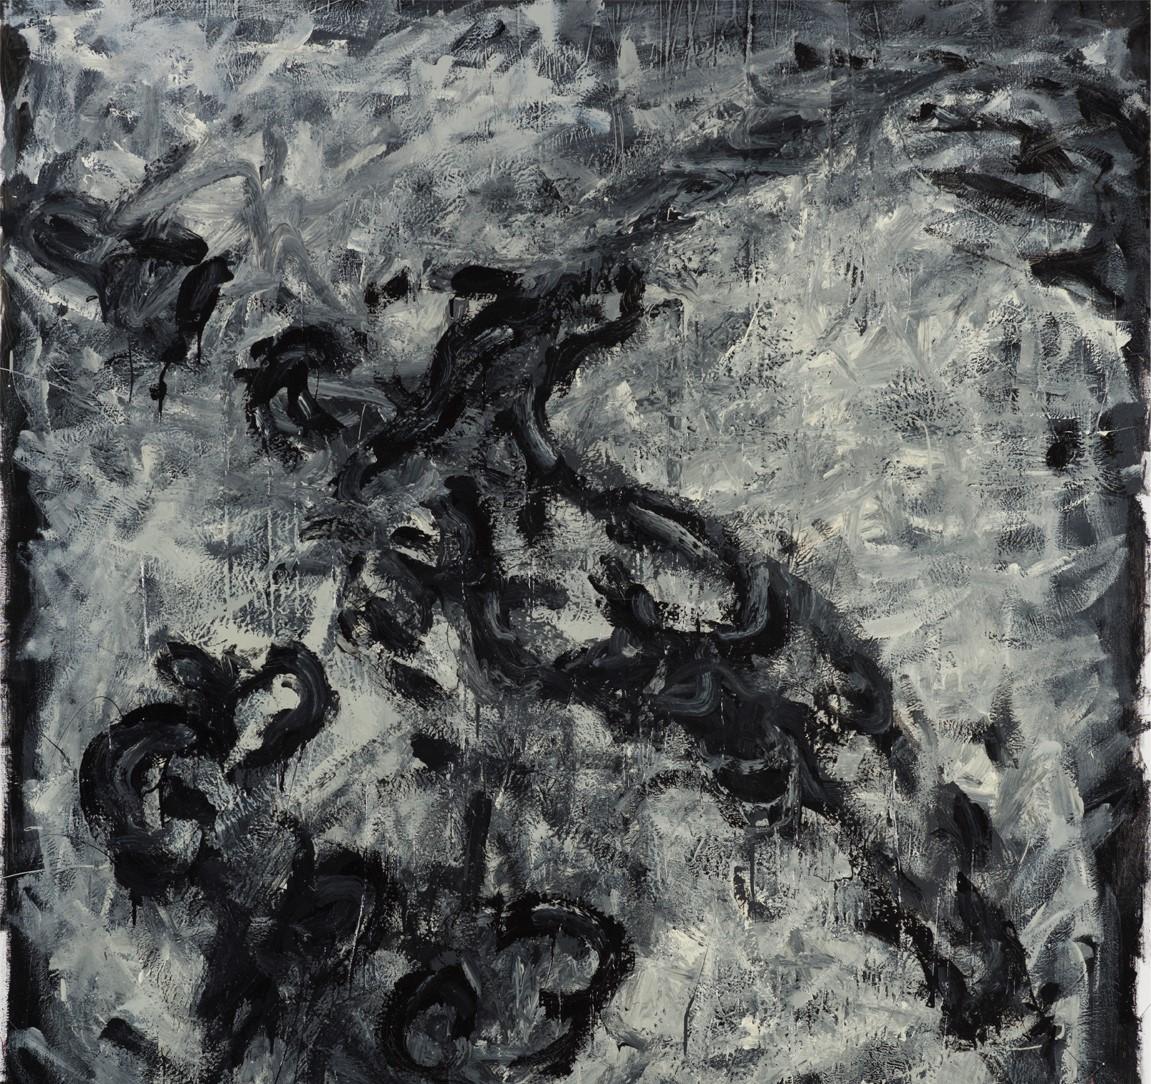 Untitled 09 [Remains of the Remains 09] - Contemporary, Abstract, Black, Grey - Abstract Expressionist Painting by Zsolt Berszán